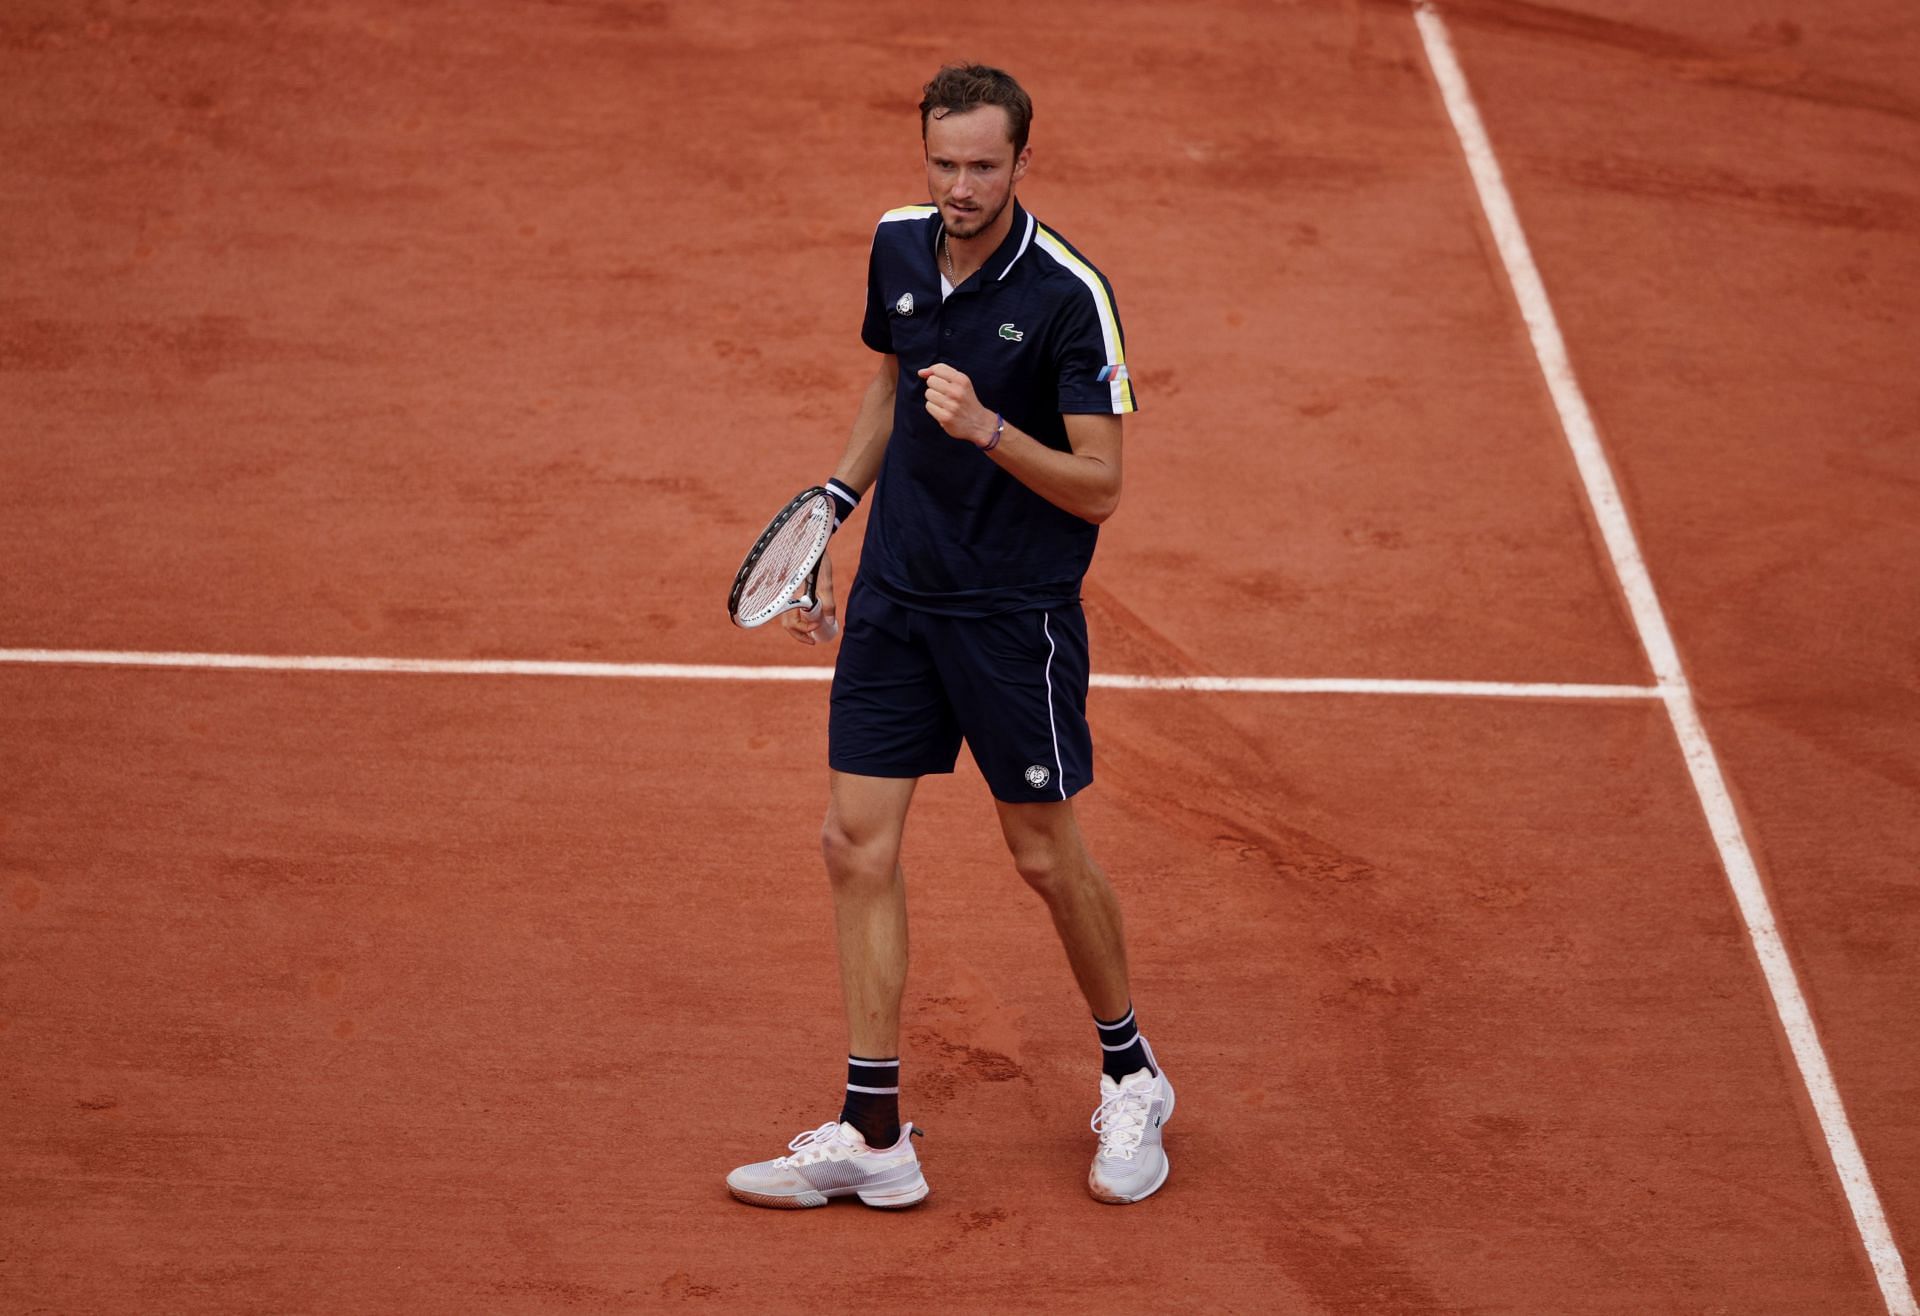 Daniil Medvedev at the 2021 French Open.